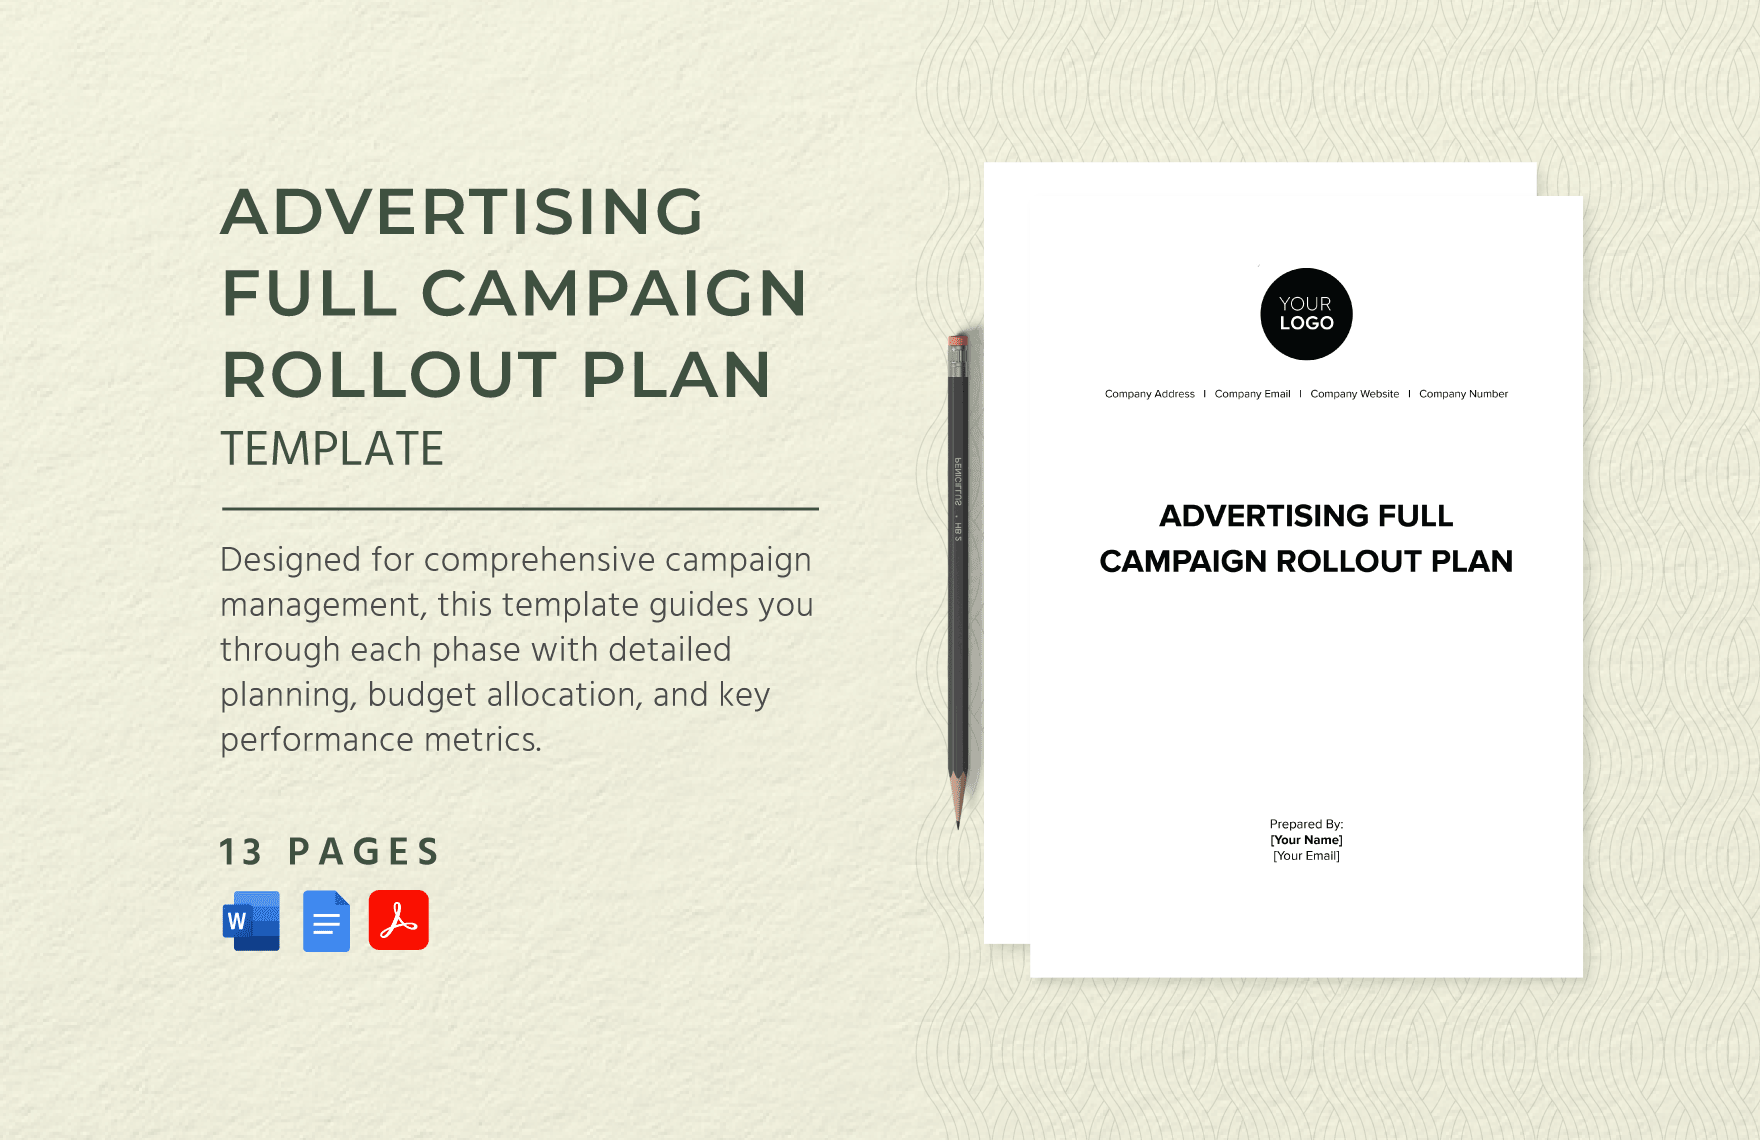 Advertising Full Campaign Rollout Plan Template